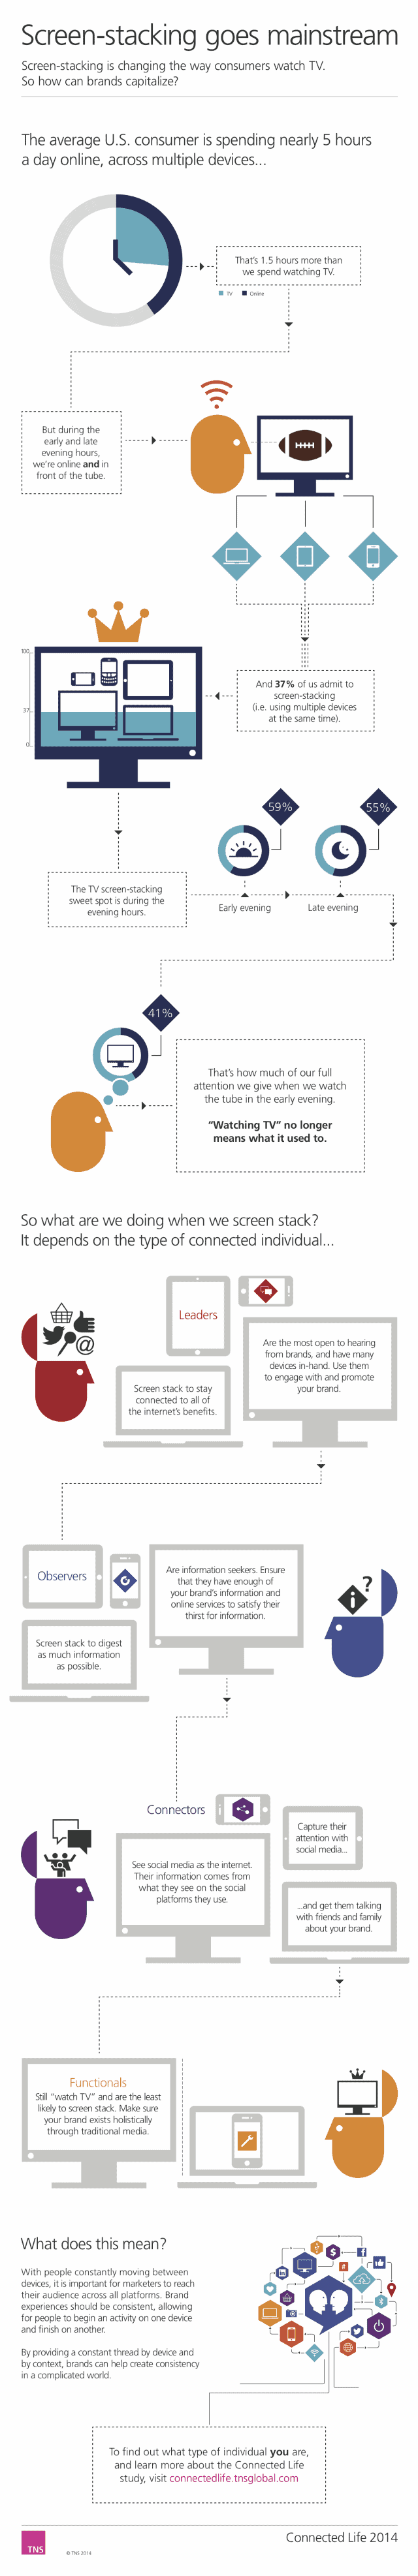 Screen Stacking Goes Mainstream Infographic